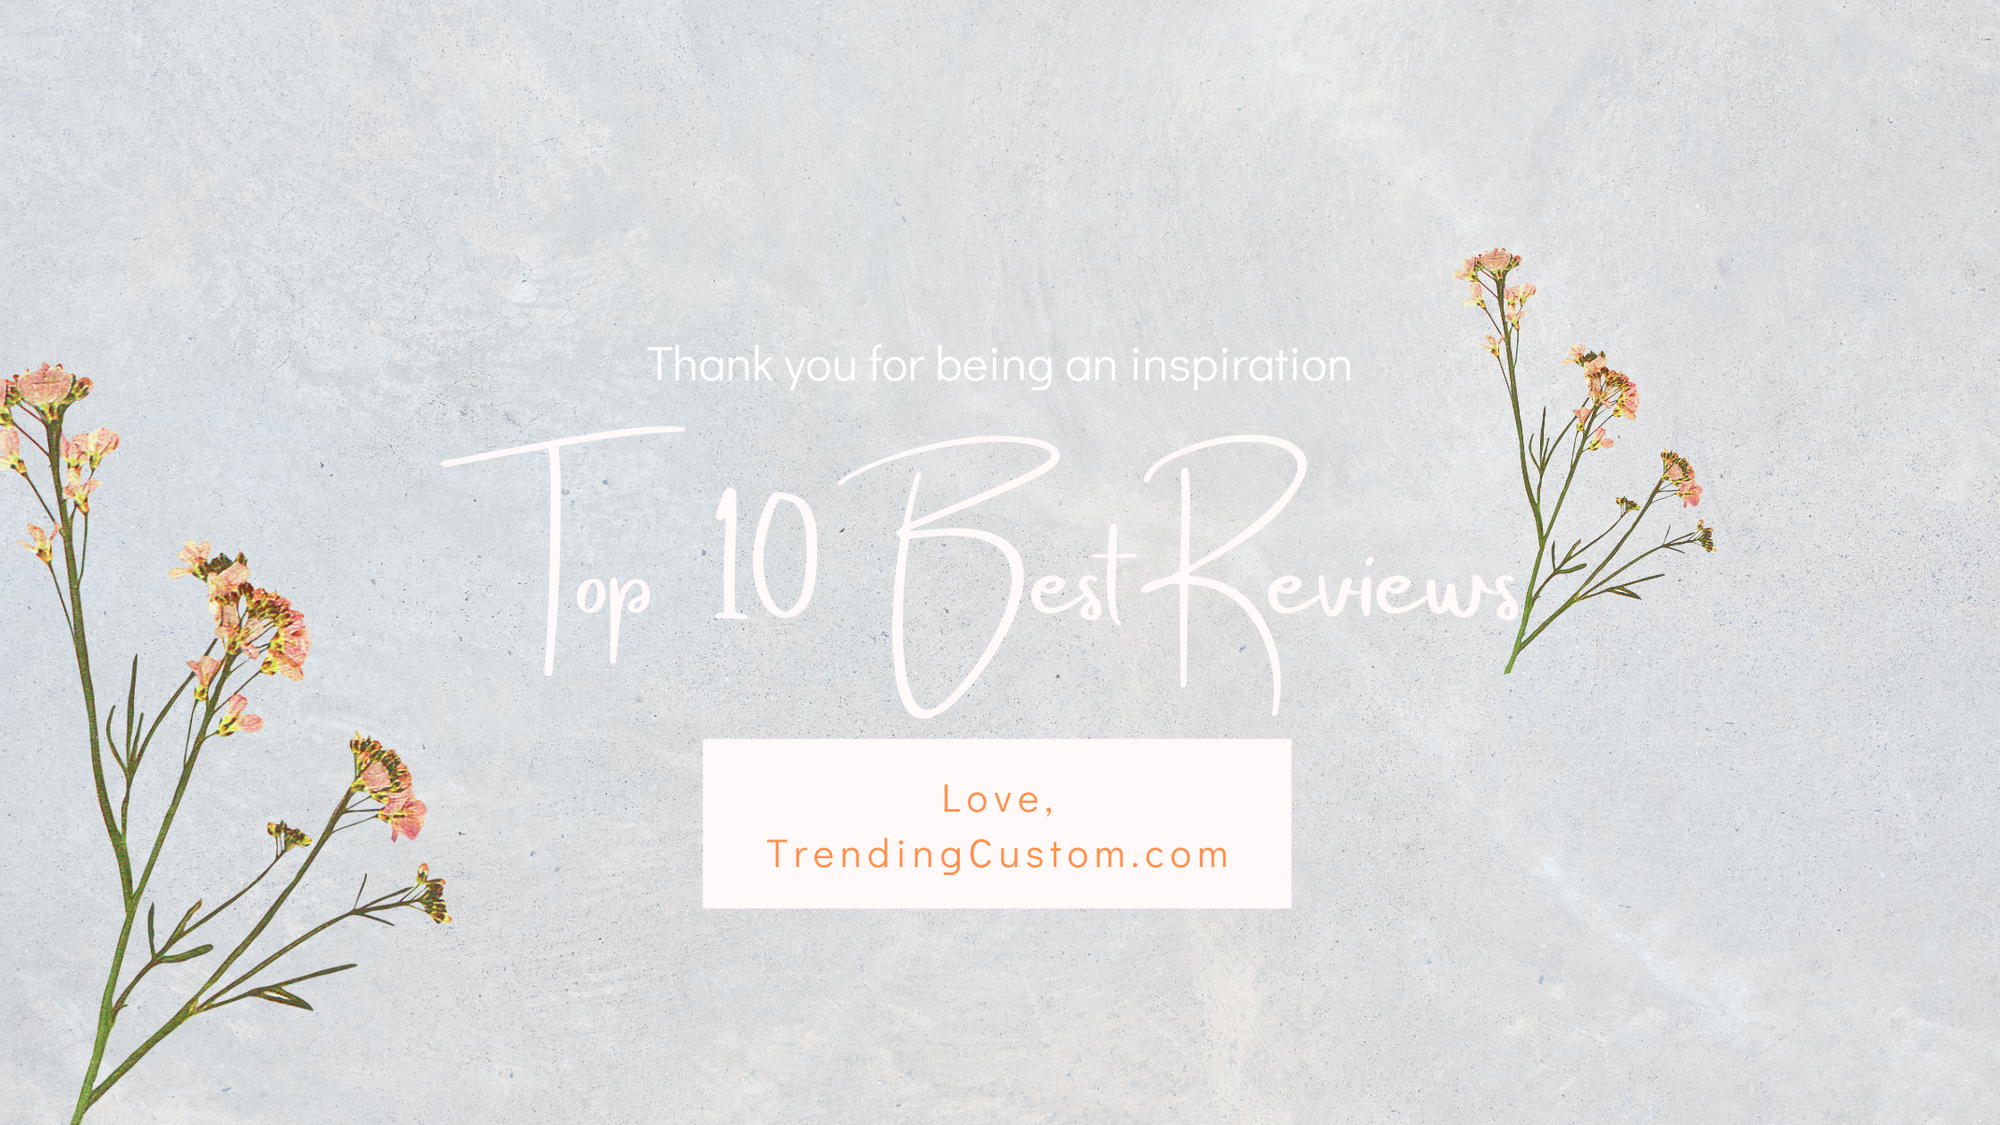 Top 10 Raving Reviews: Our Customers Speak Out! - March 25th